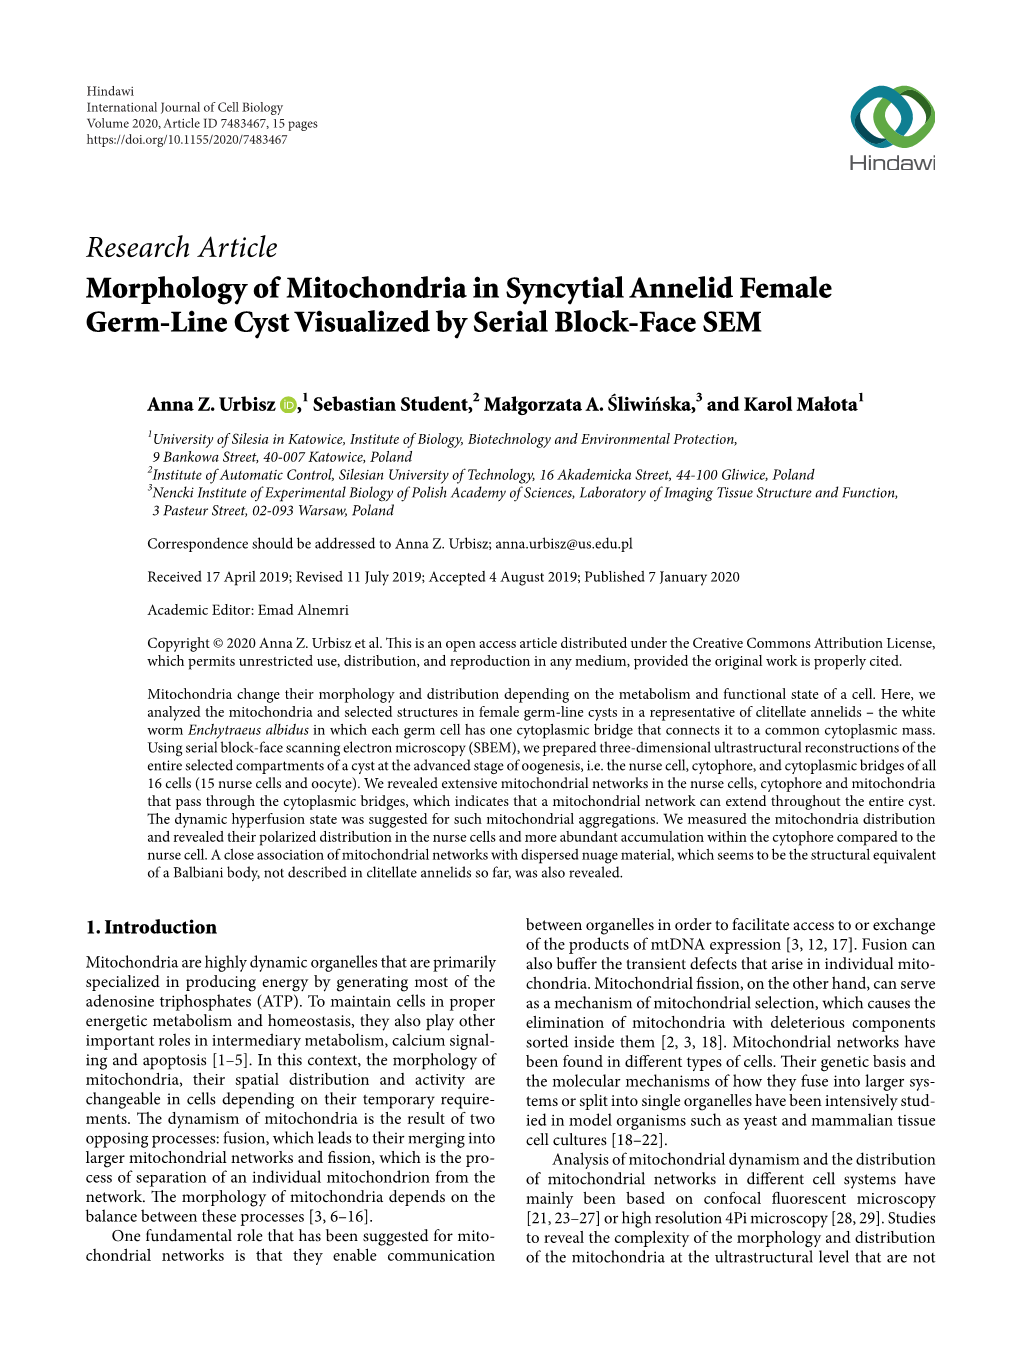 Research Article Morphology of Mitochondria in Syncytial Annelid Female Germ-Line Cyst Visualized by Serial Block-Face SEM